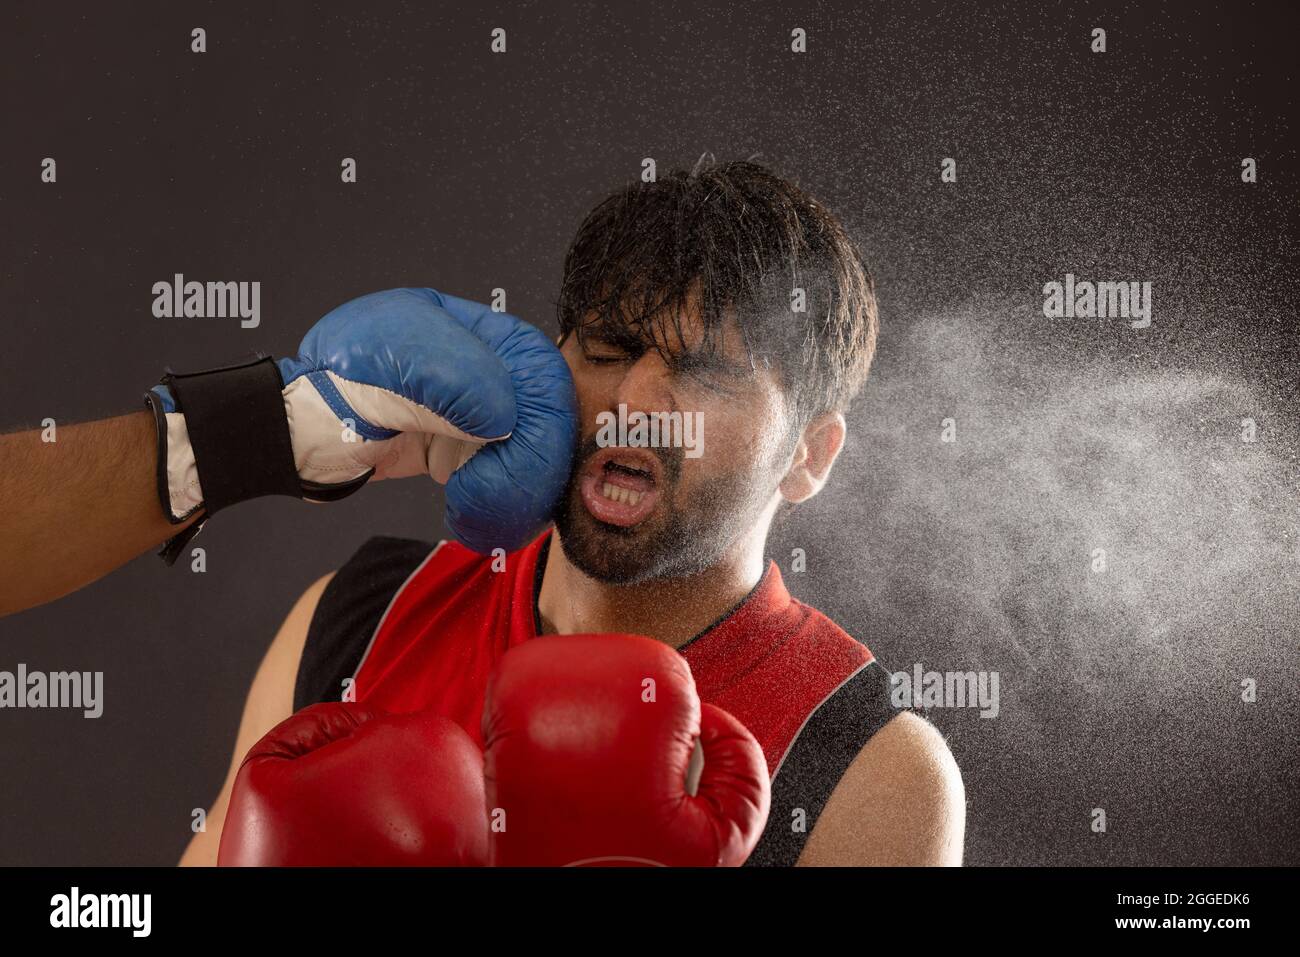 A BOXER BEING PUNCHED ON FACE BY ANOTHER PLAYER WHILE BOXING Stock Photo